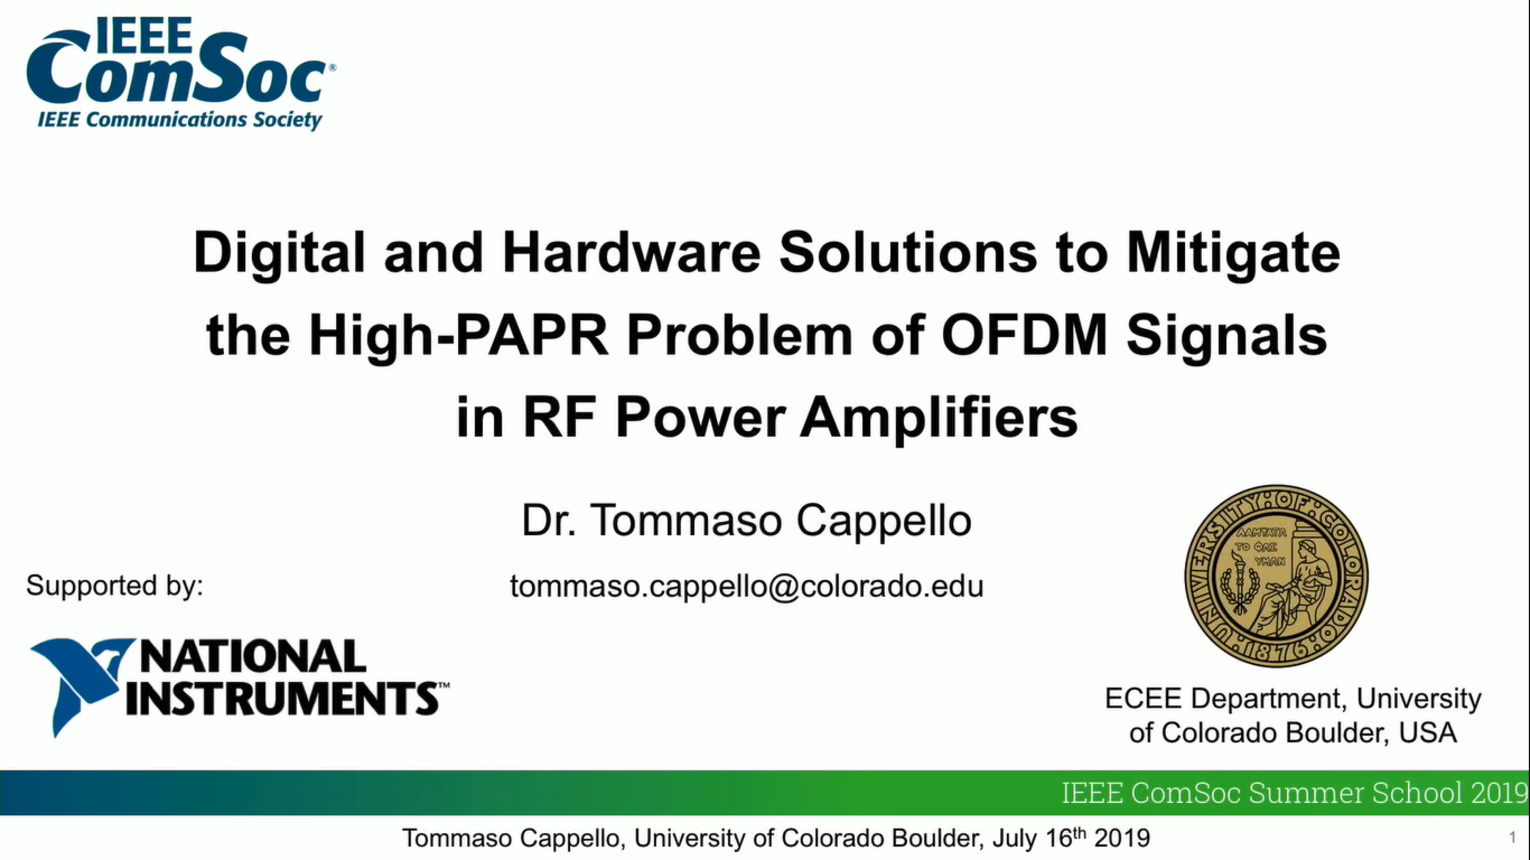 Digital and hardware solutions to mitigate the high PAPR problem of OFDM signals signals in RF power amplifiers